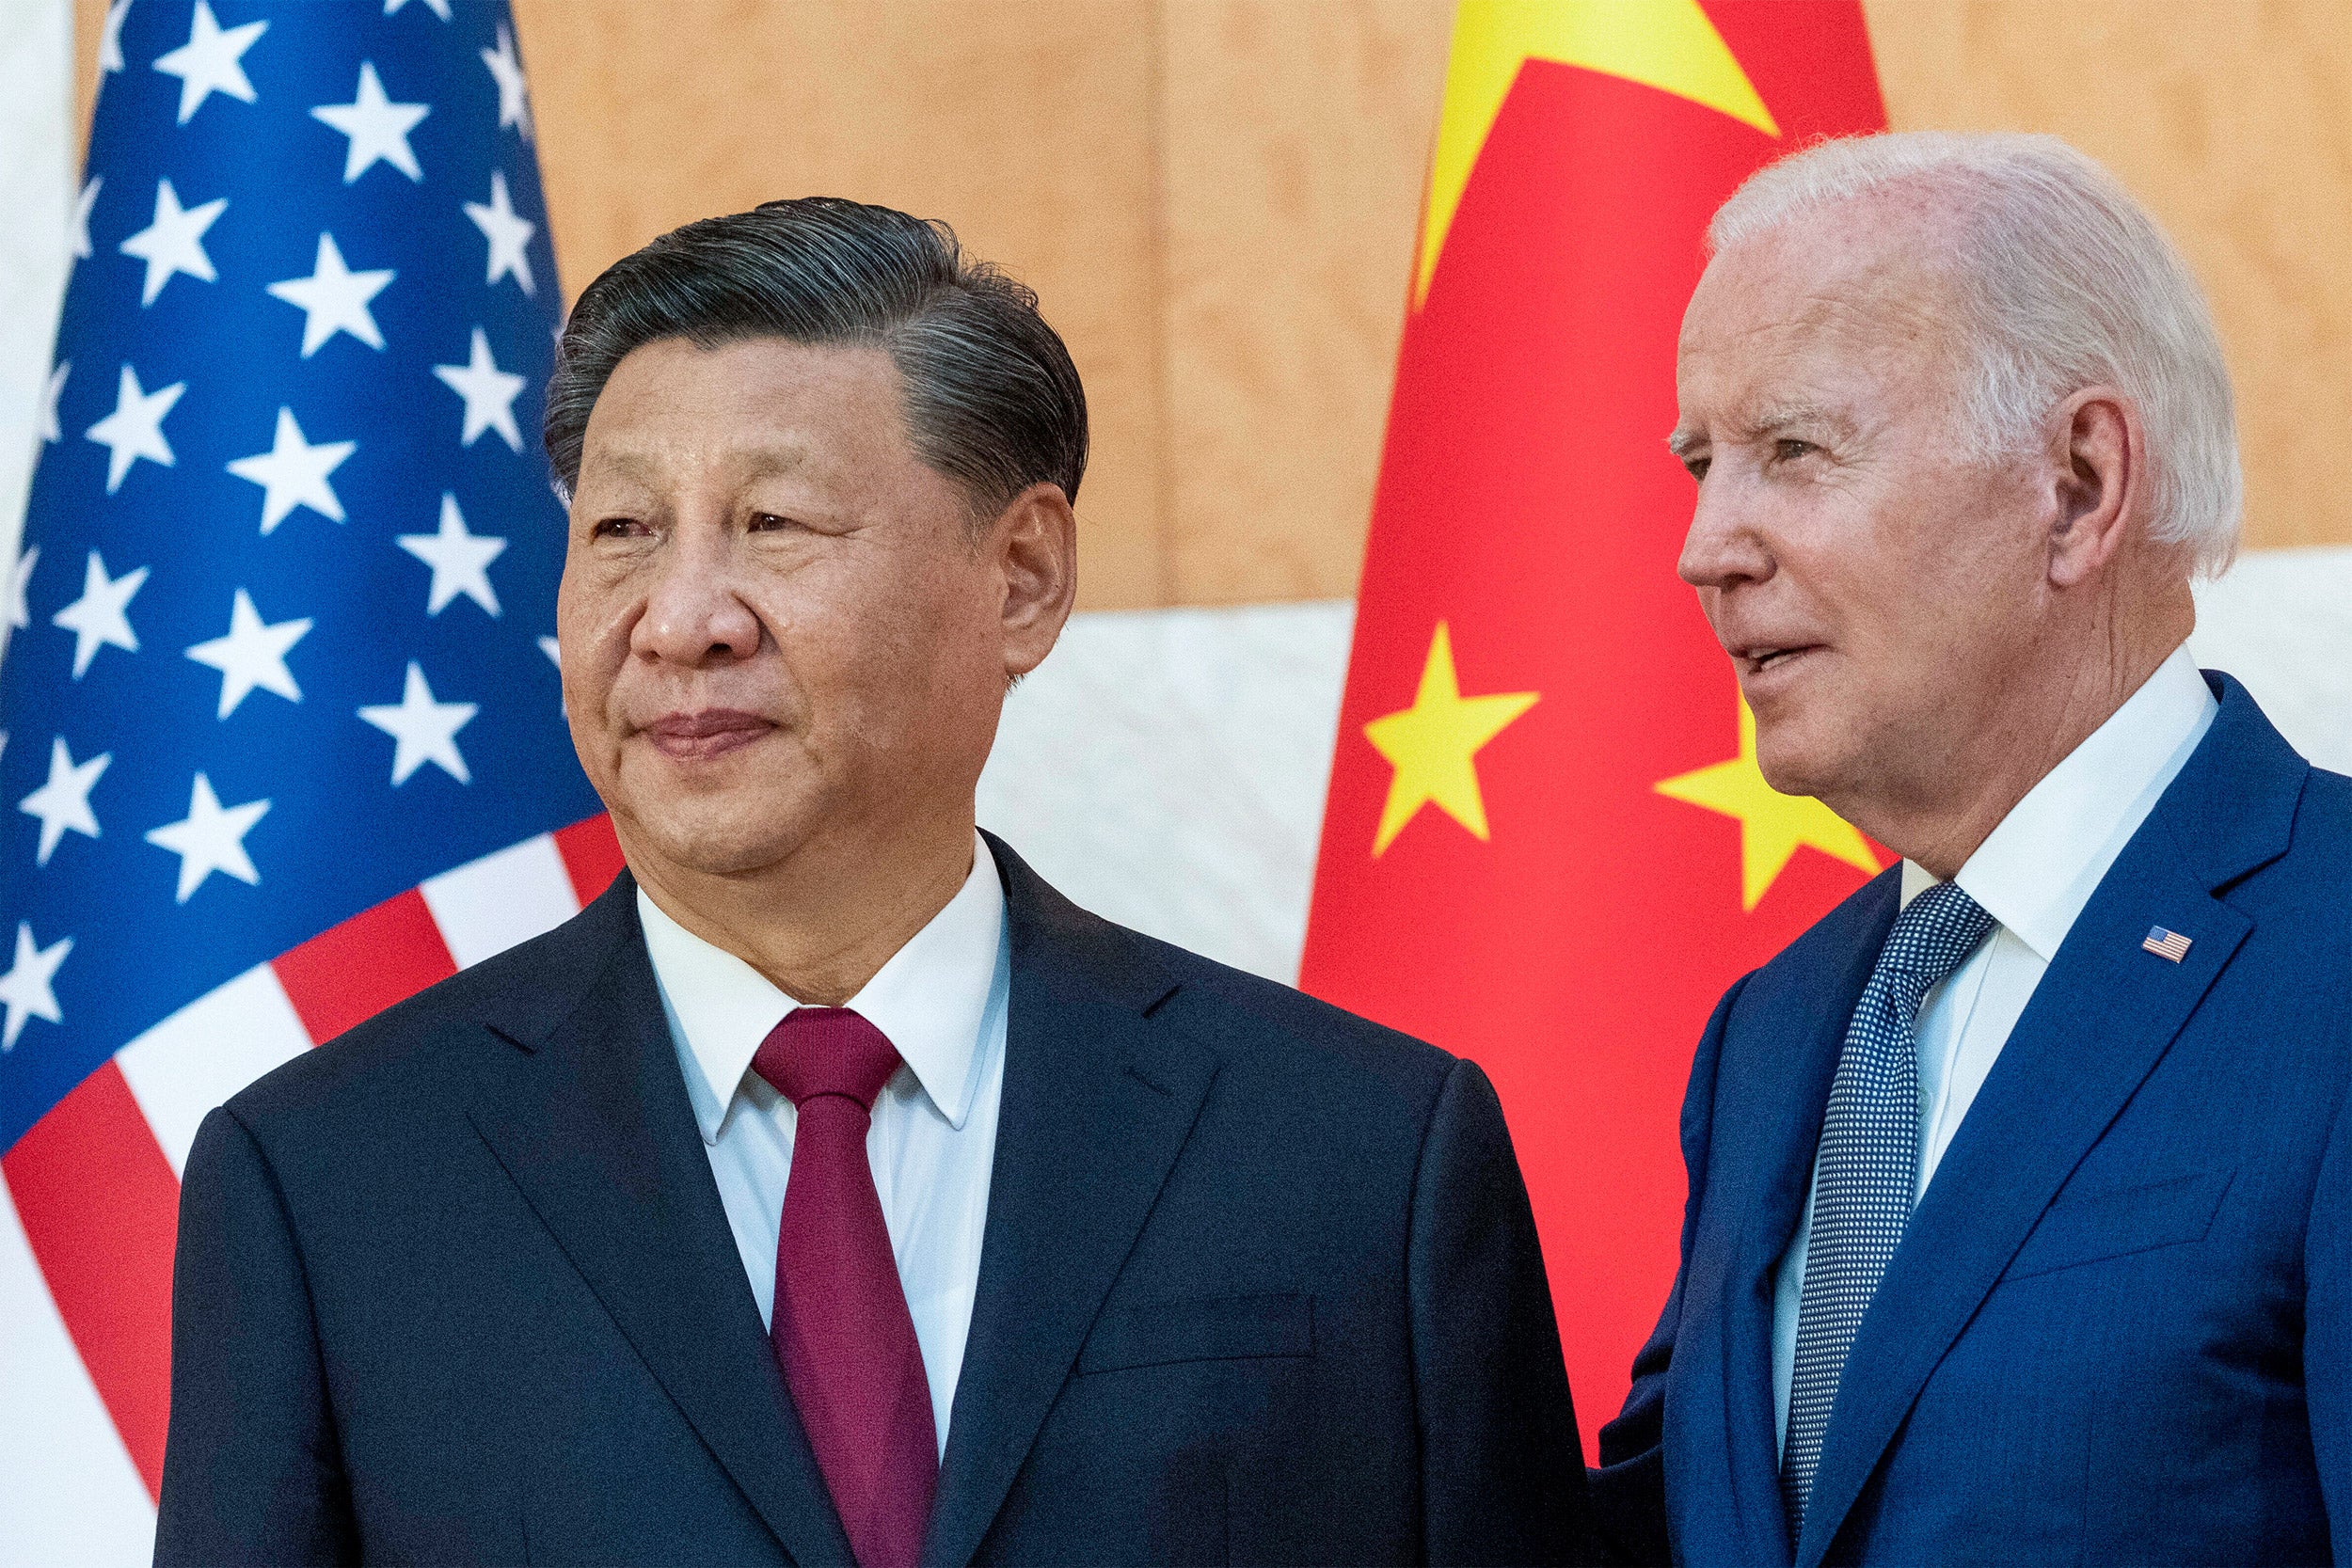 President Joe Biden, right, stands with Chinese President Xi Jinping.